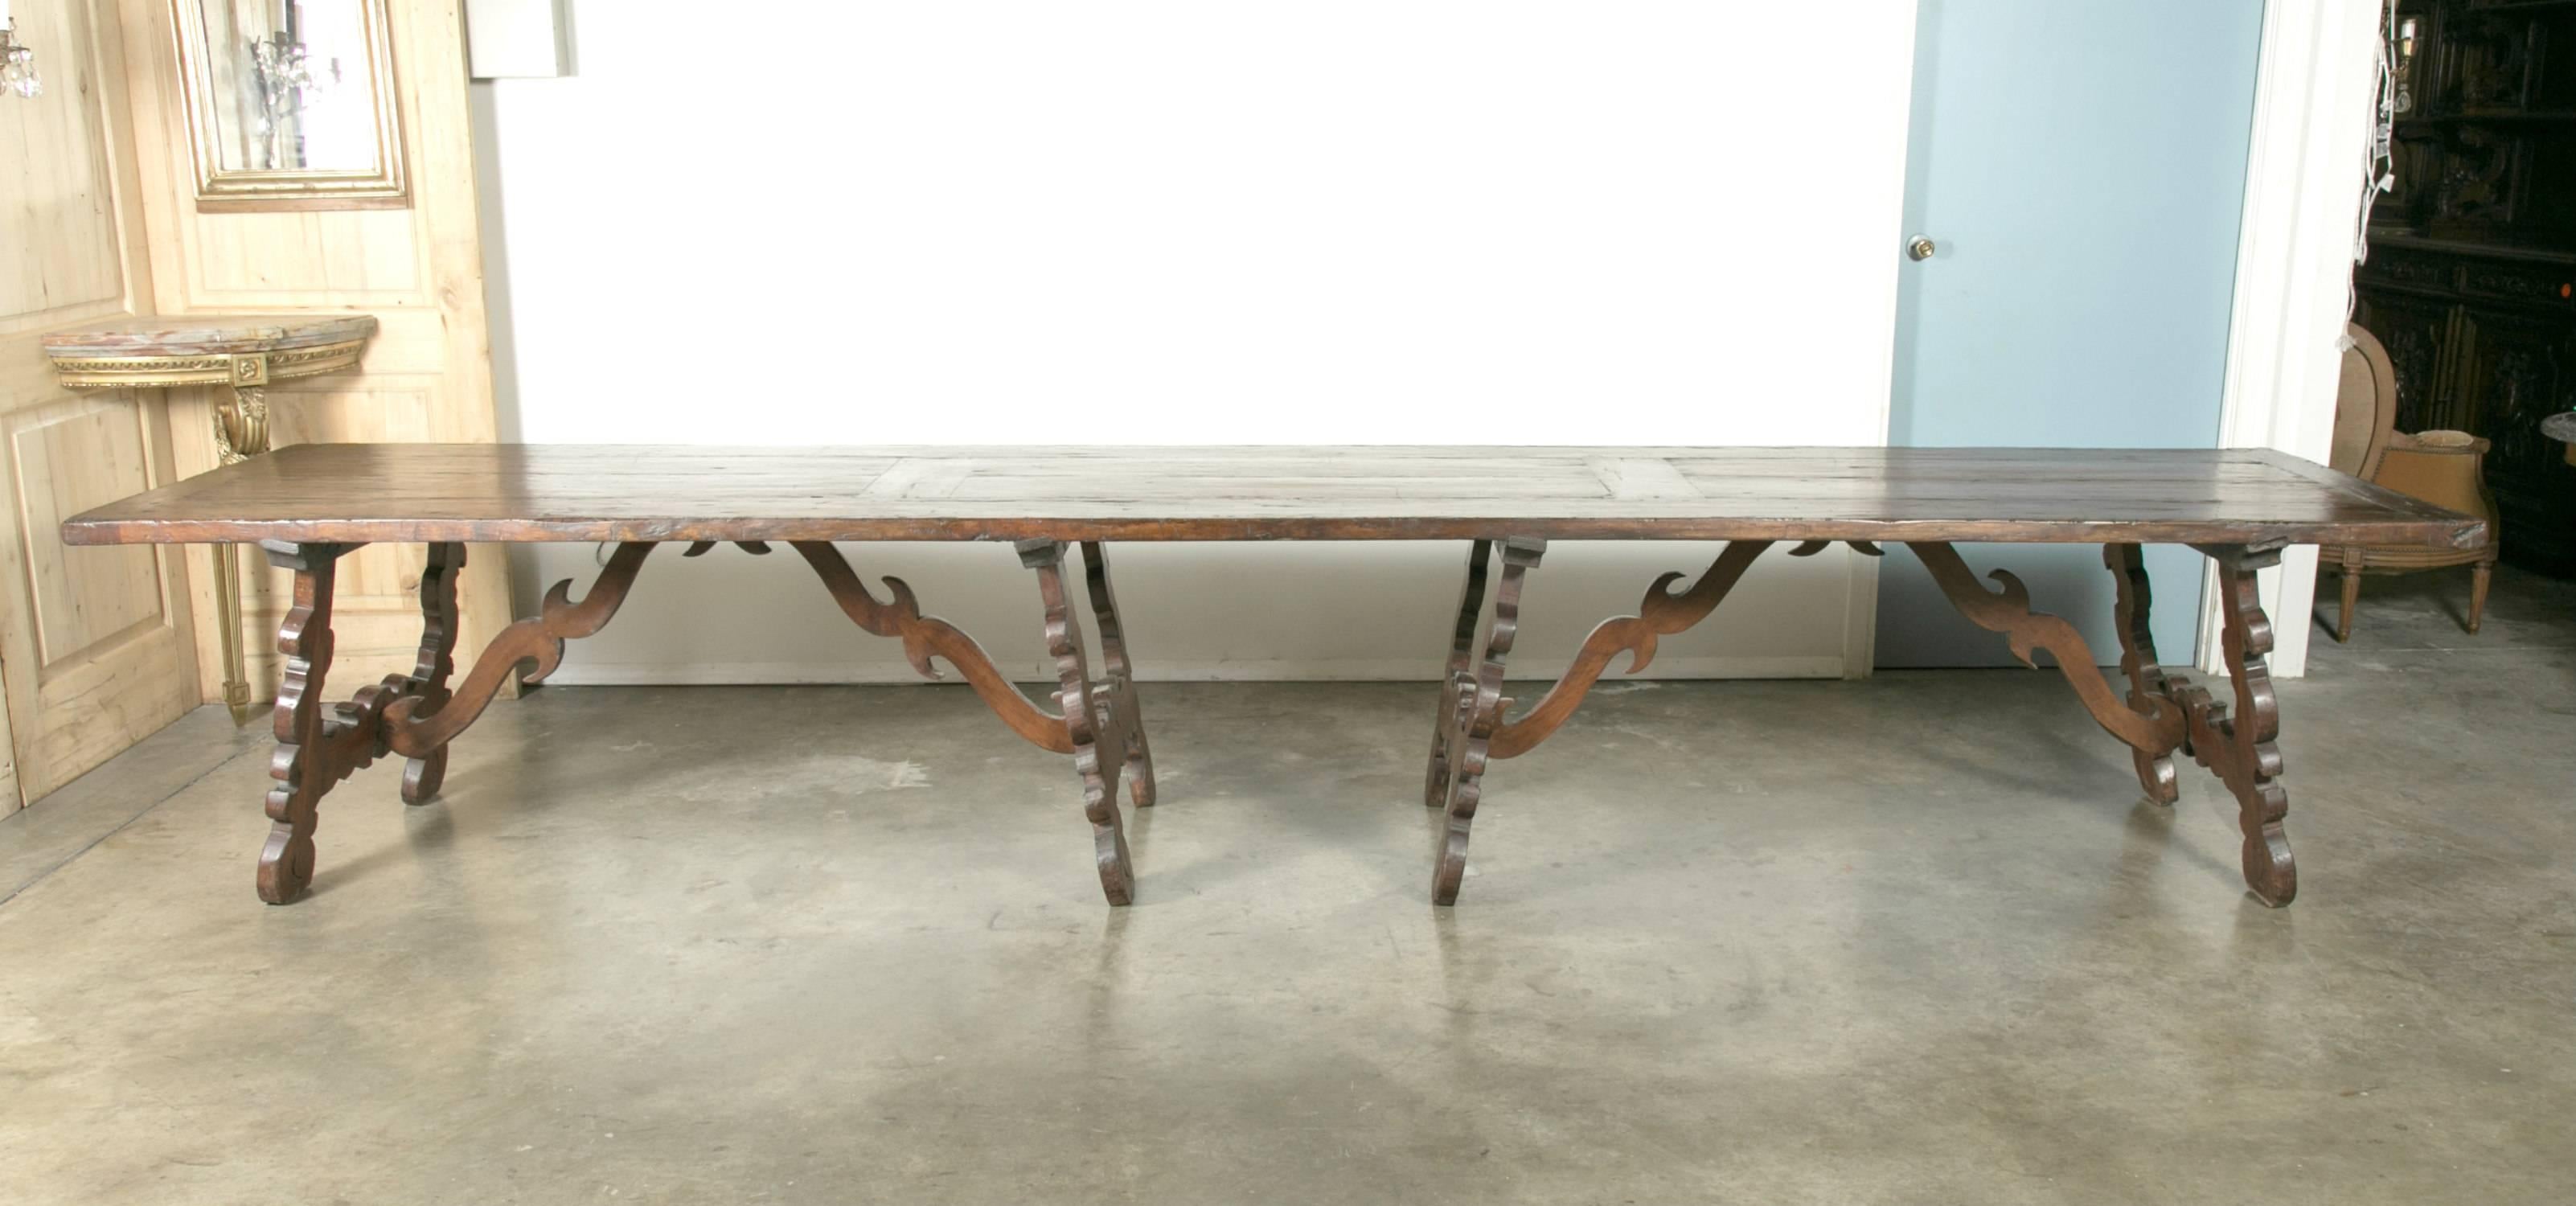 A monumental early 19th century Italian trestle table, having a rectangular framed solid walnut inset board top, resting on four hand-carved, classical lyre legs joined by four beautifully carved pair of wood S-scroll stretchers.

This unique